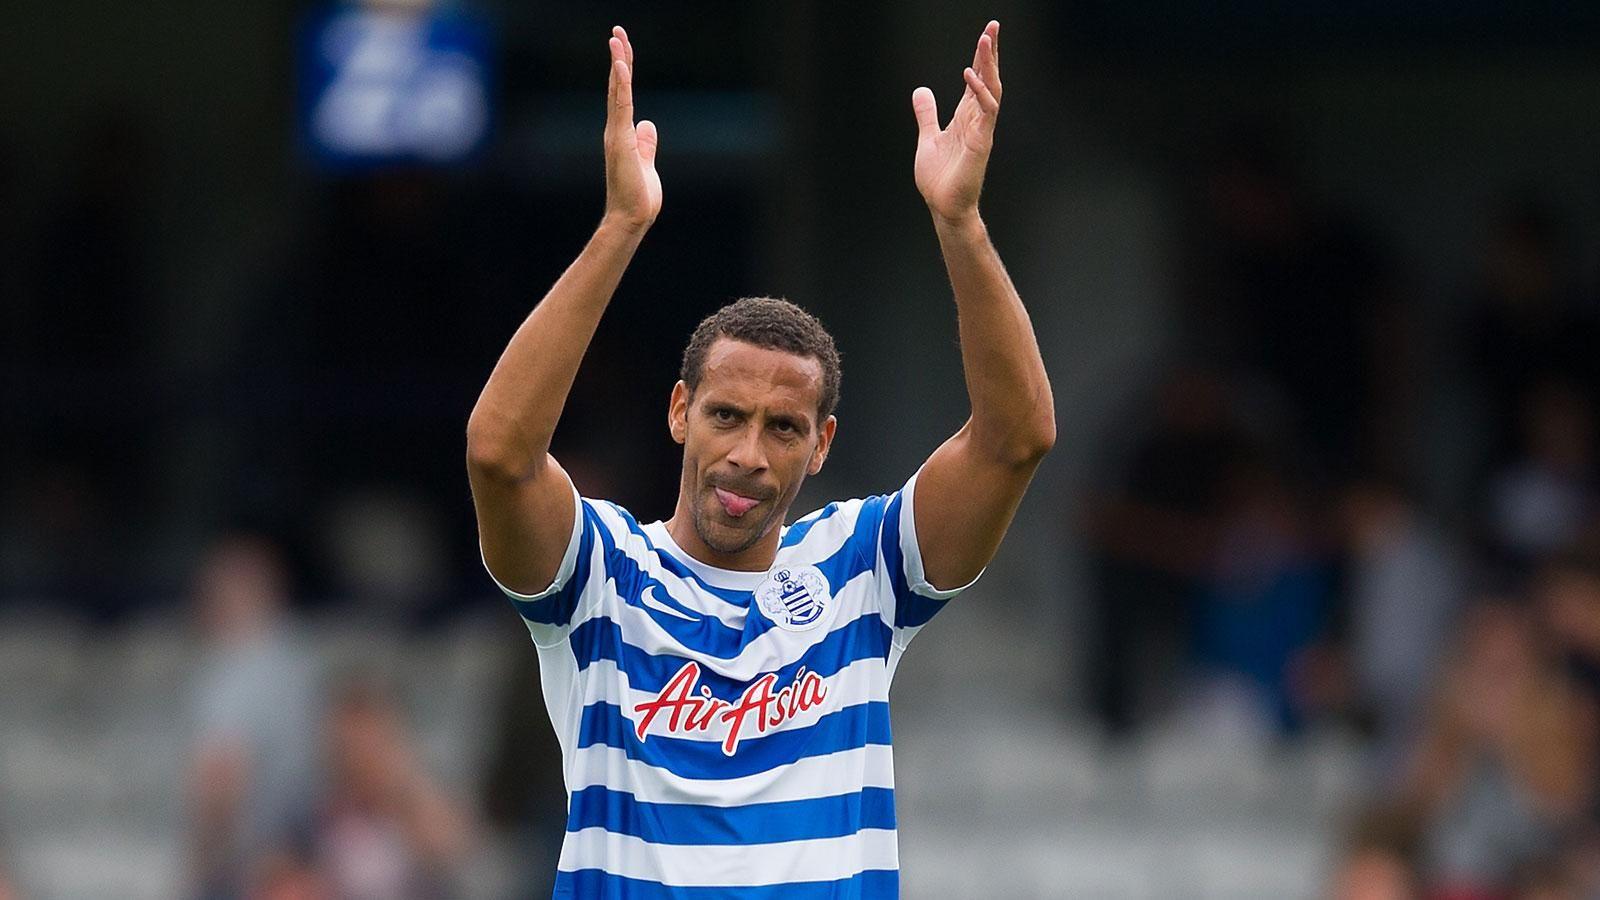 RELIEF FOR RIO FERDINAND AFTER CONFIDENCE BOOSTING WIN